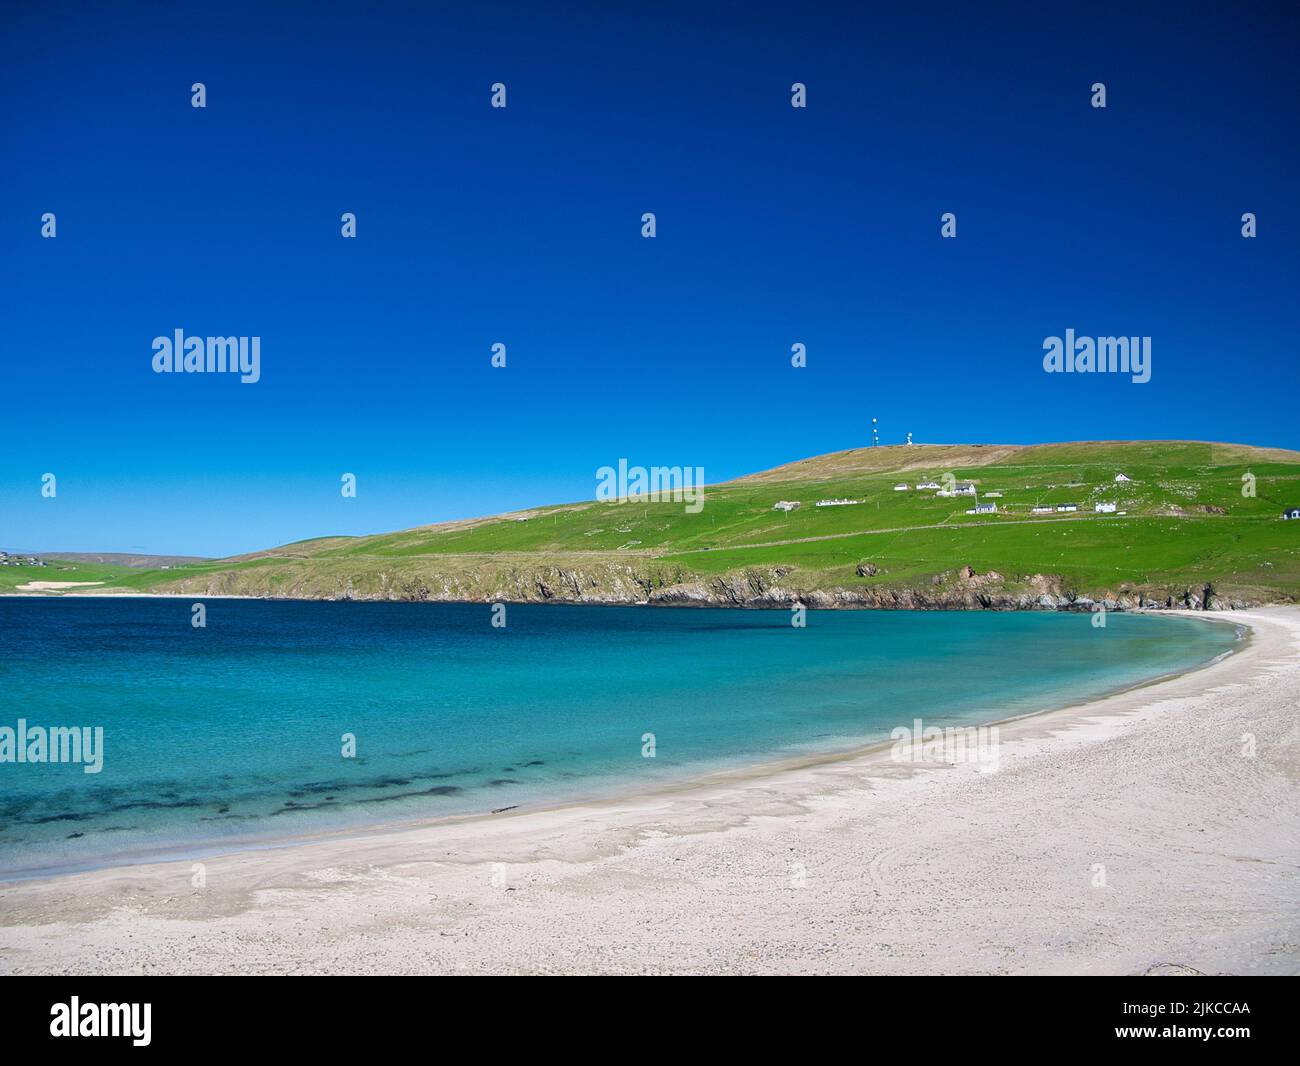 The white sand and turquoise water of Spiggie Beach (Scousburgh Beach) in southern Shetland, UK. Taken on a sunny day with a clear blue sky. Stock Photo